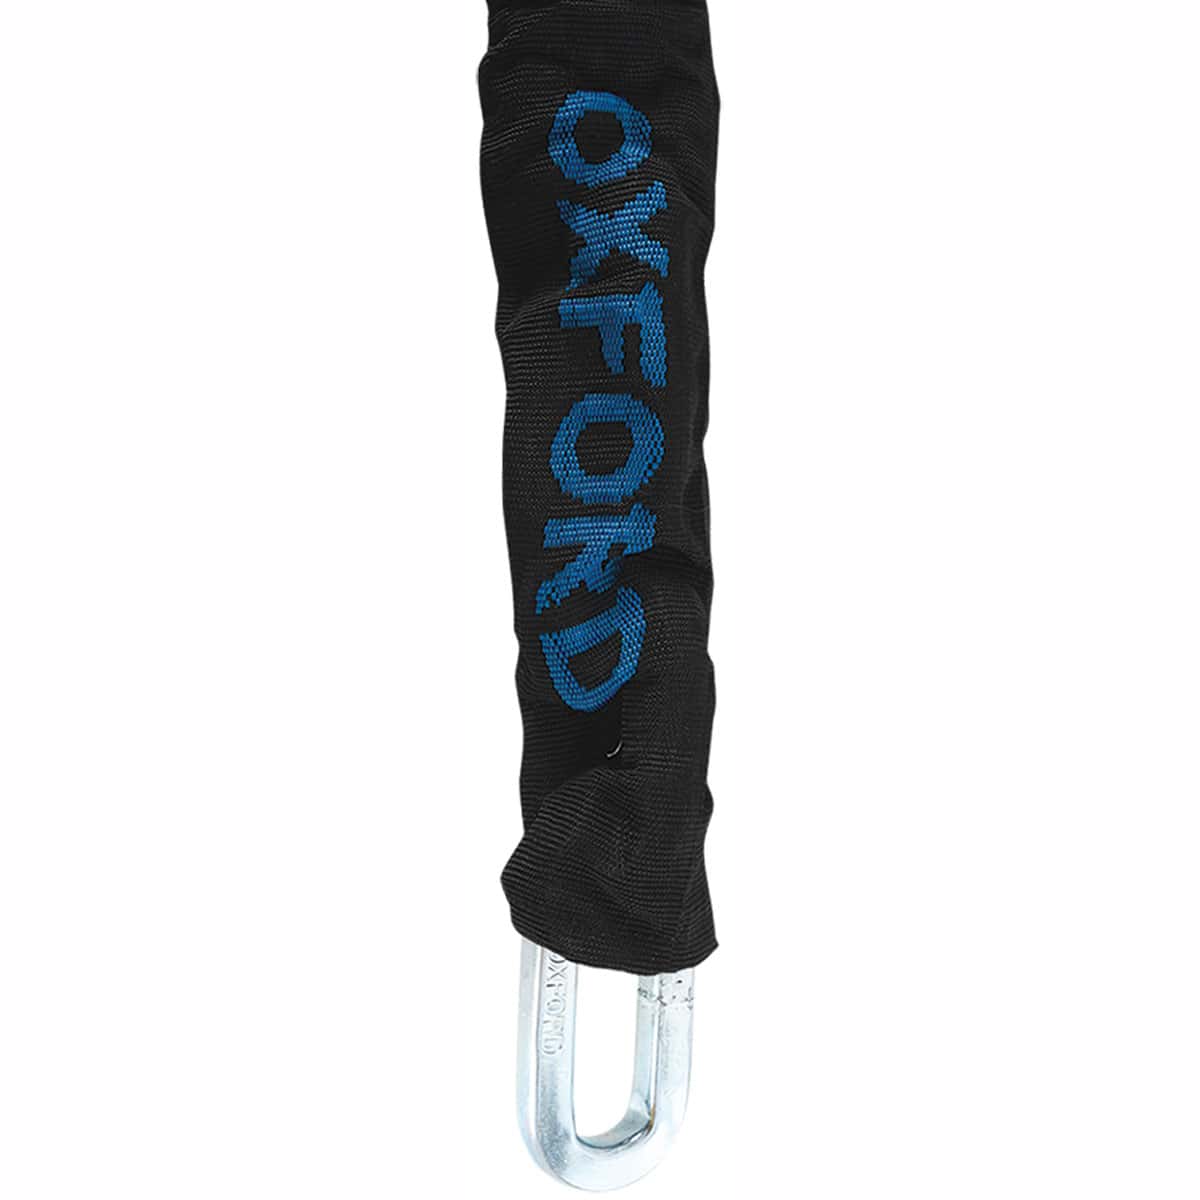 Order the Oxford HD Motorbike Heavy Duty Padlock and Chain for cost-effective motorcycle and scooter security